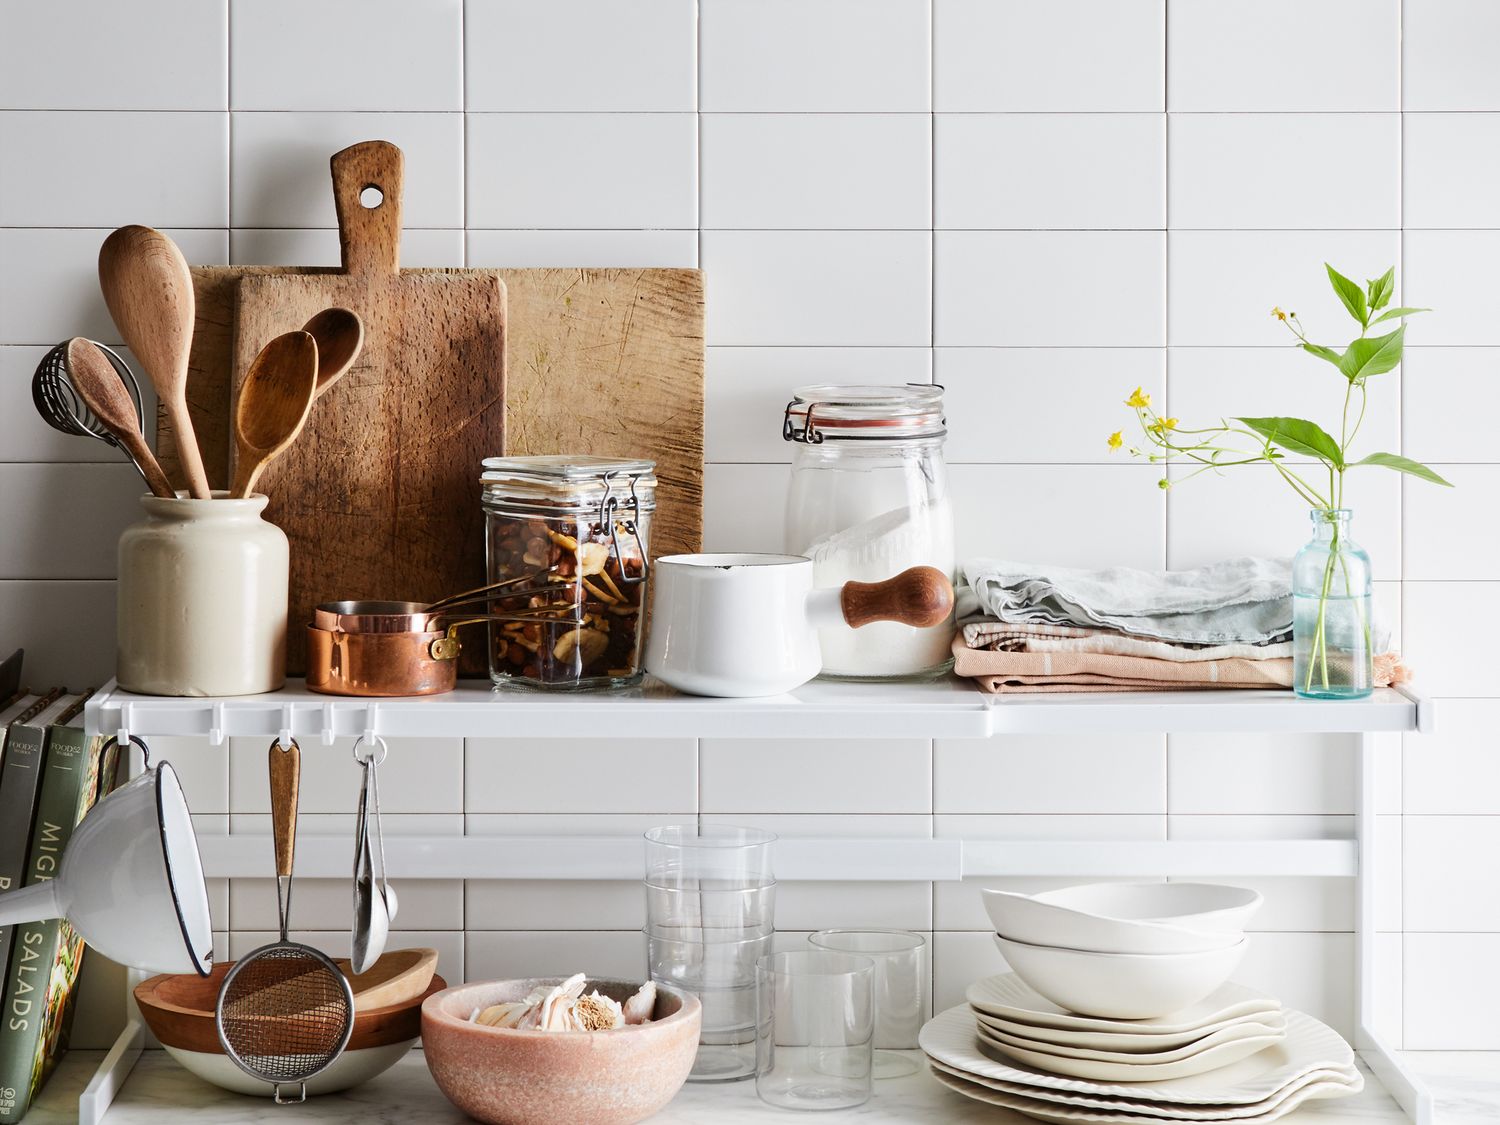 Meta: Kitchen Racks for Every Home Cook: Say Goodbye to Messy Countertops